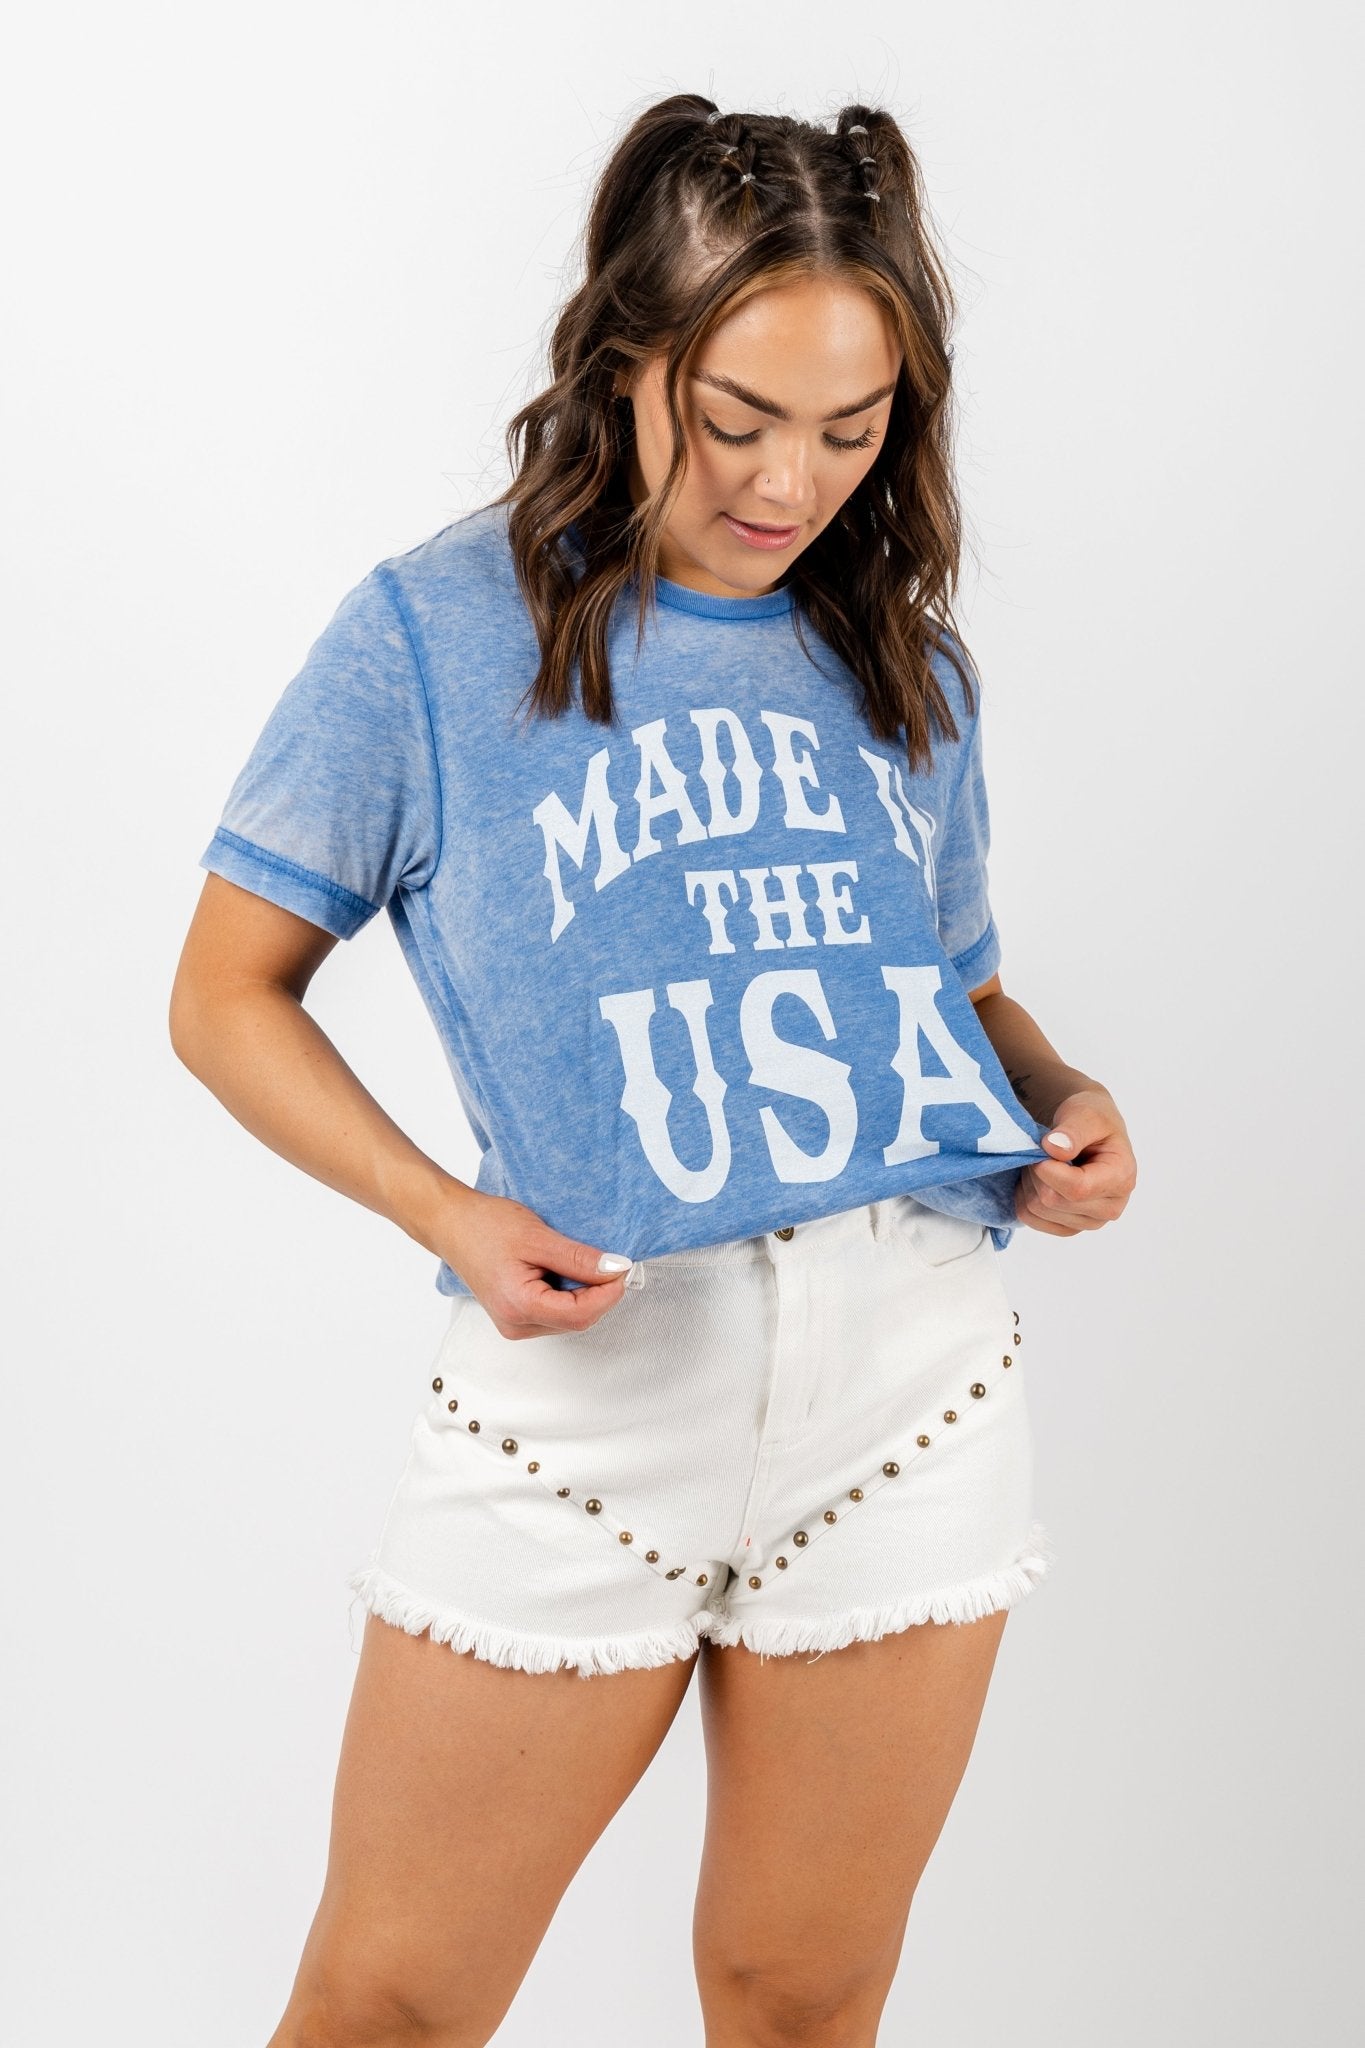 Made in the USA acid wash t-shirt blue - Trendy T-shirts - Cute American Summer Collection at Lush Fashion Lounge Boutique in Oklahoma City